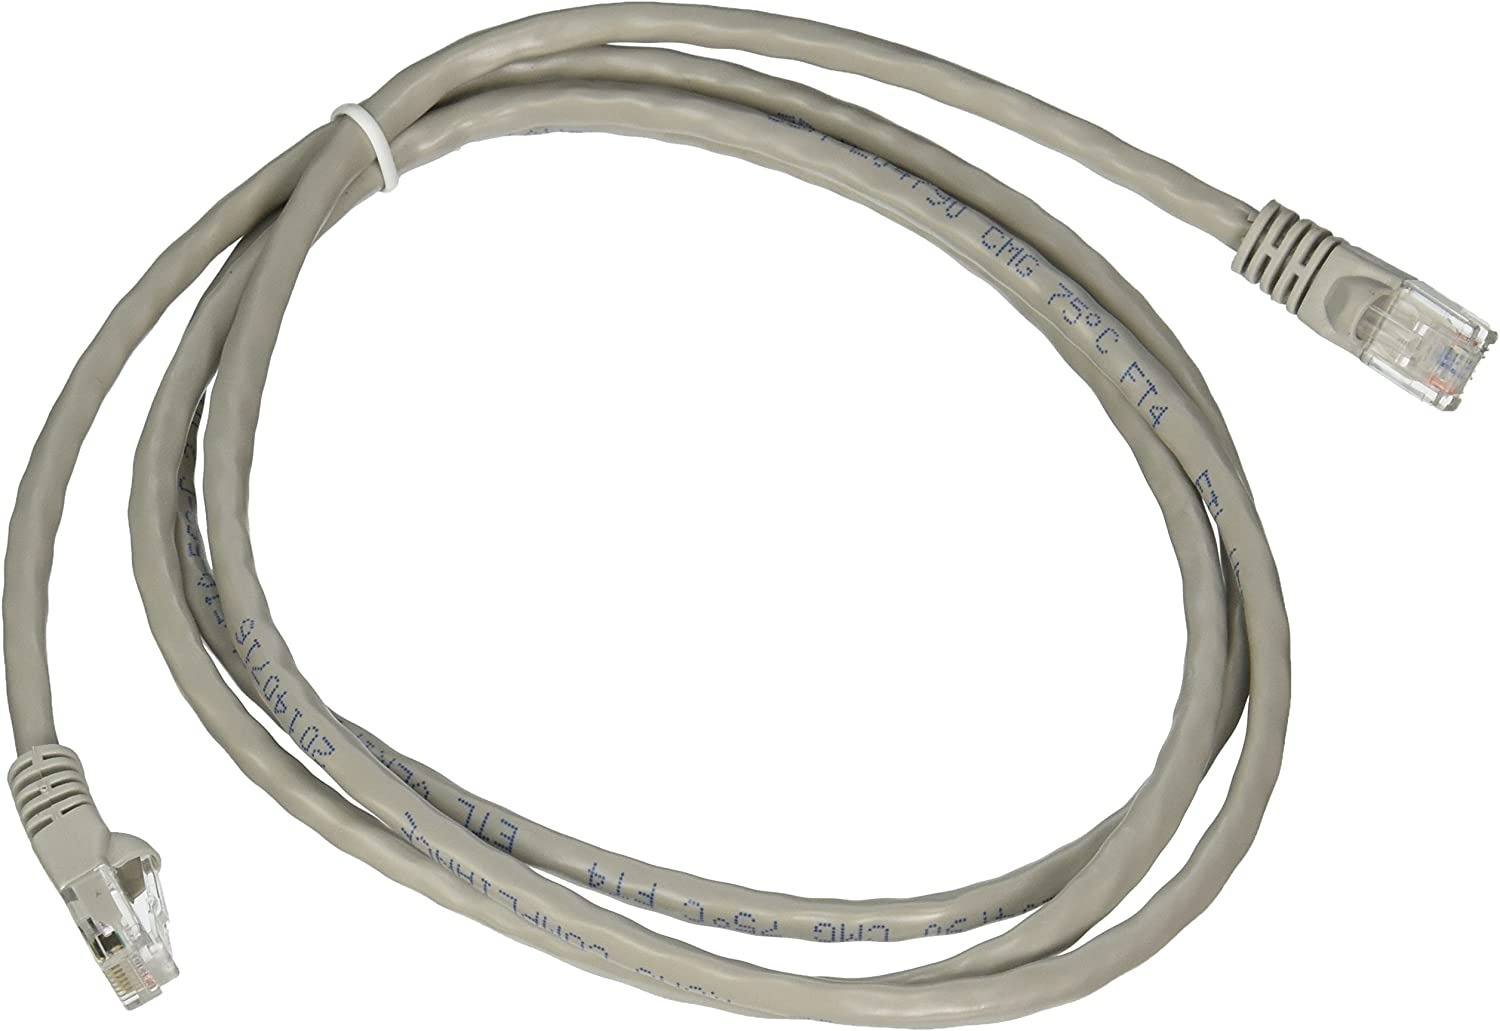 Monoprice 5' Cat5e Ethernet Patch Cable $1 shipped w/ Prime